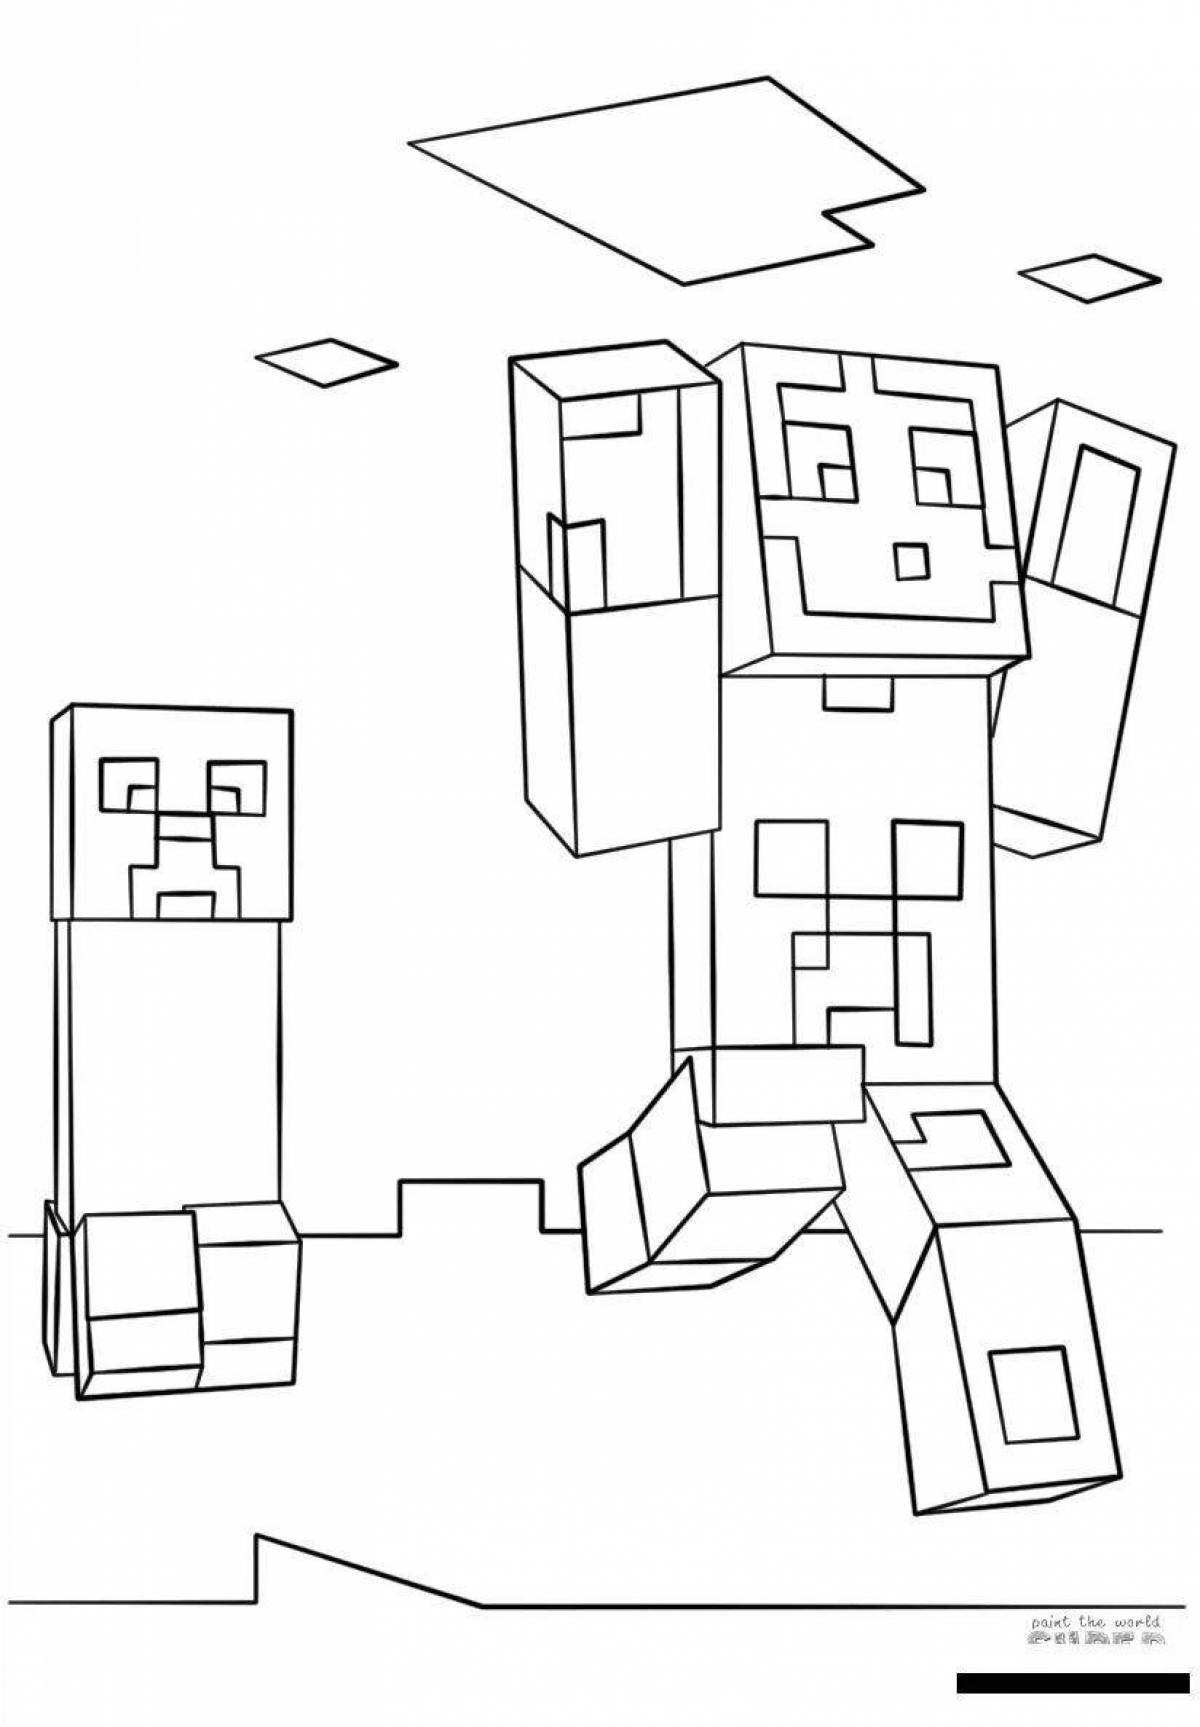 Colorful imagination minecraft coloring book